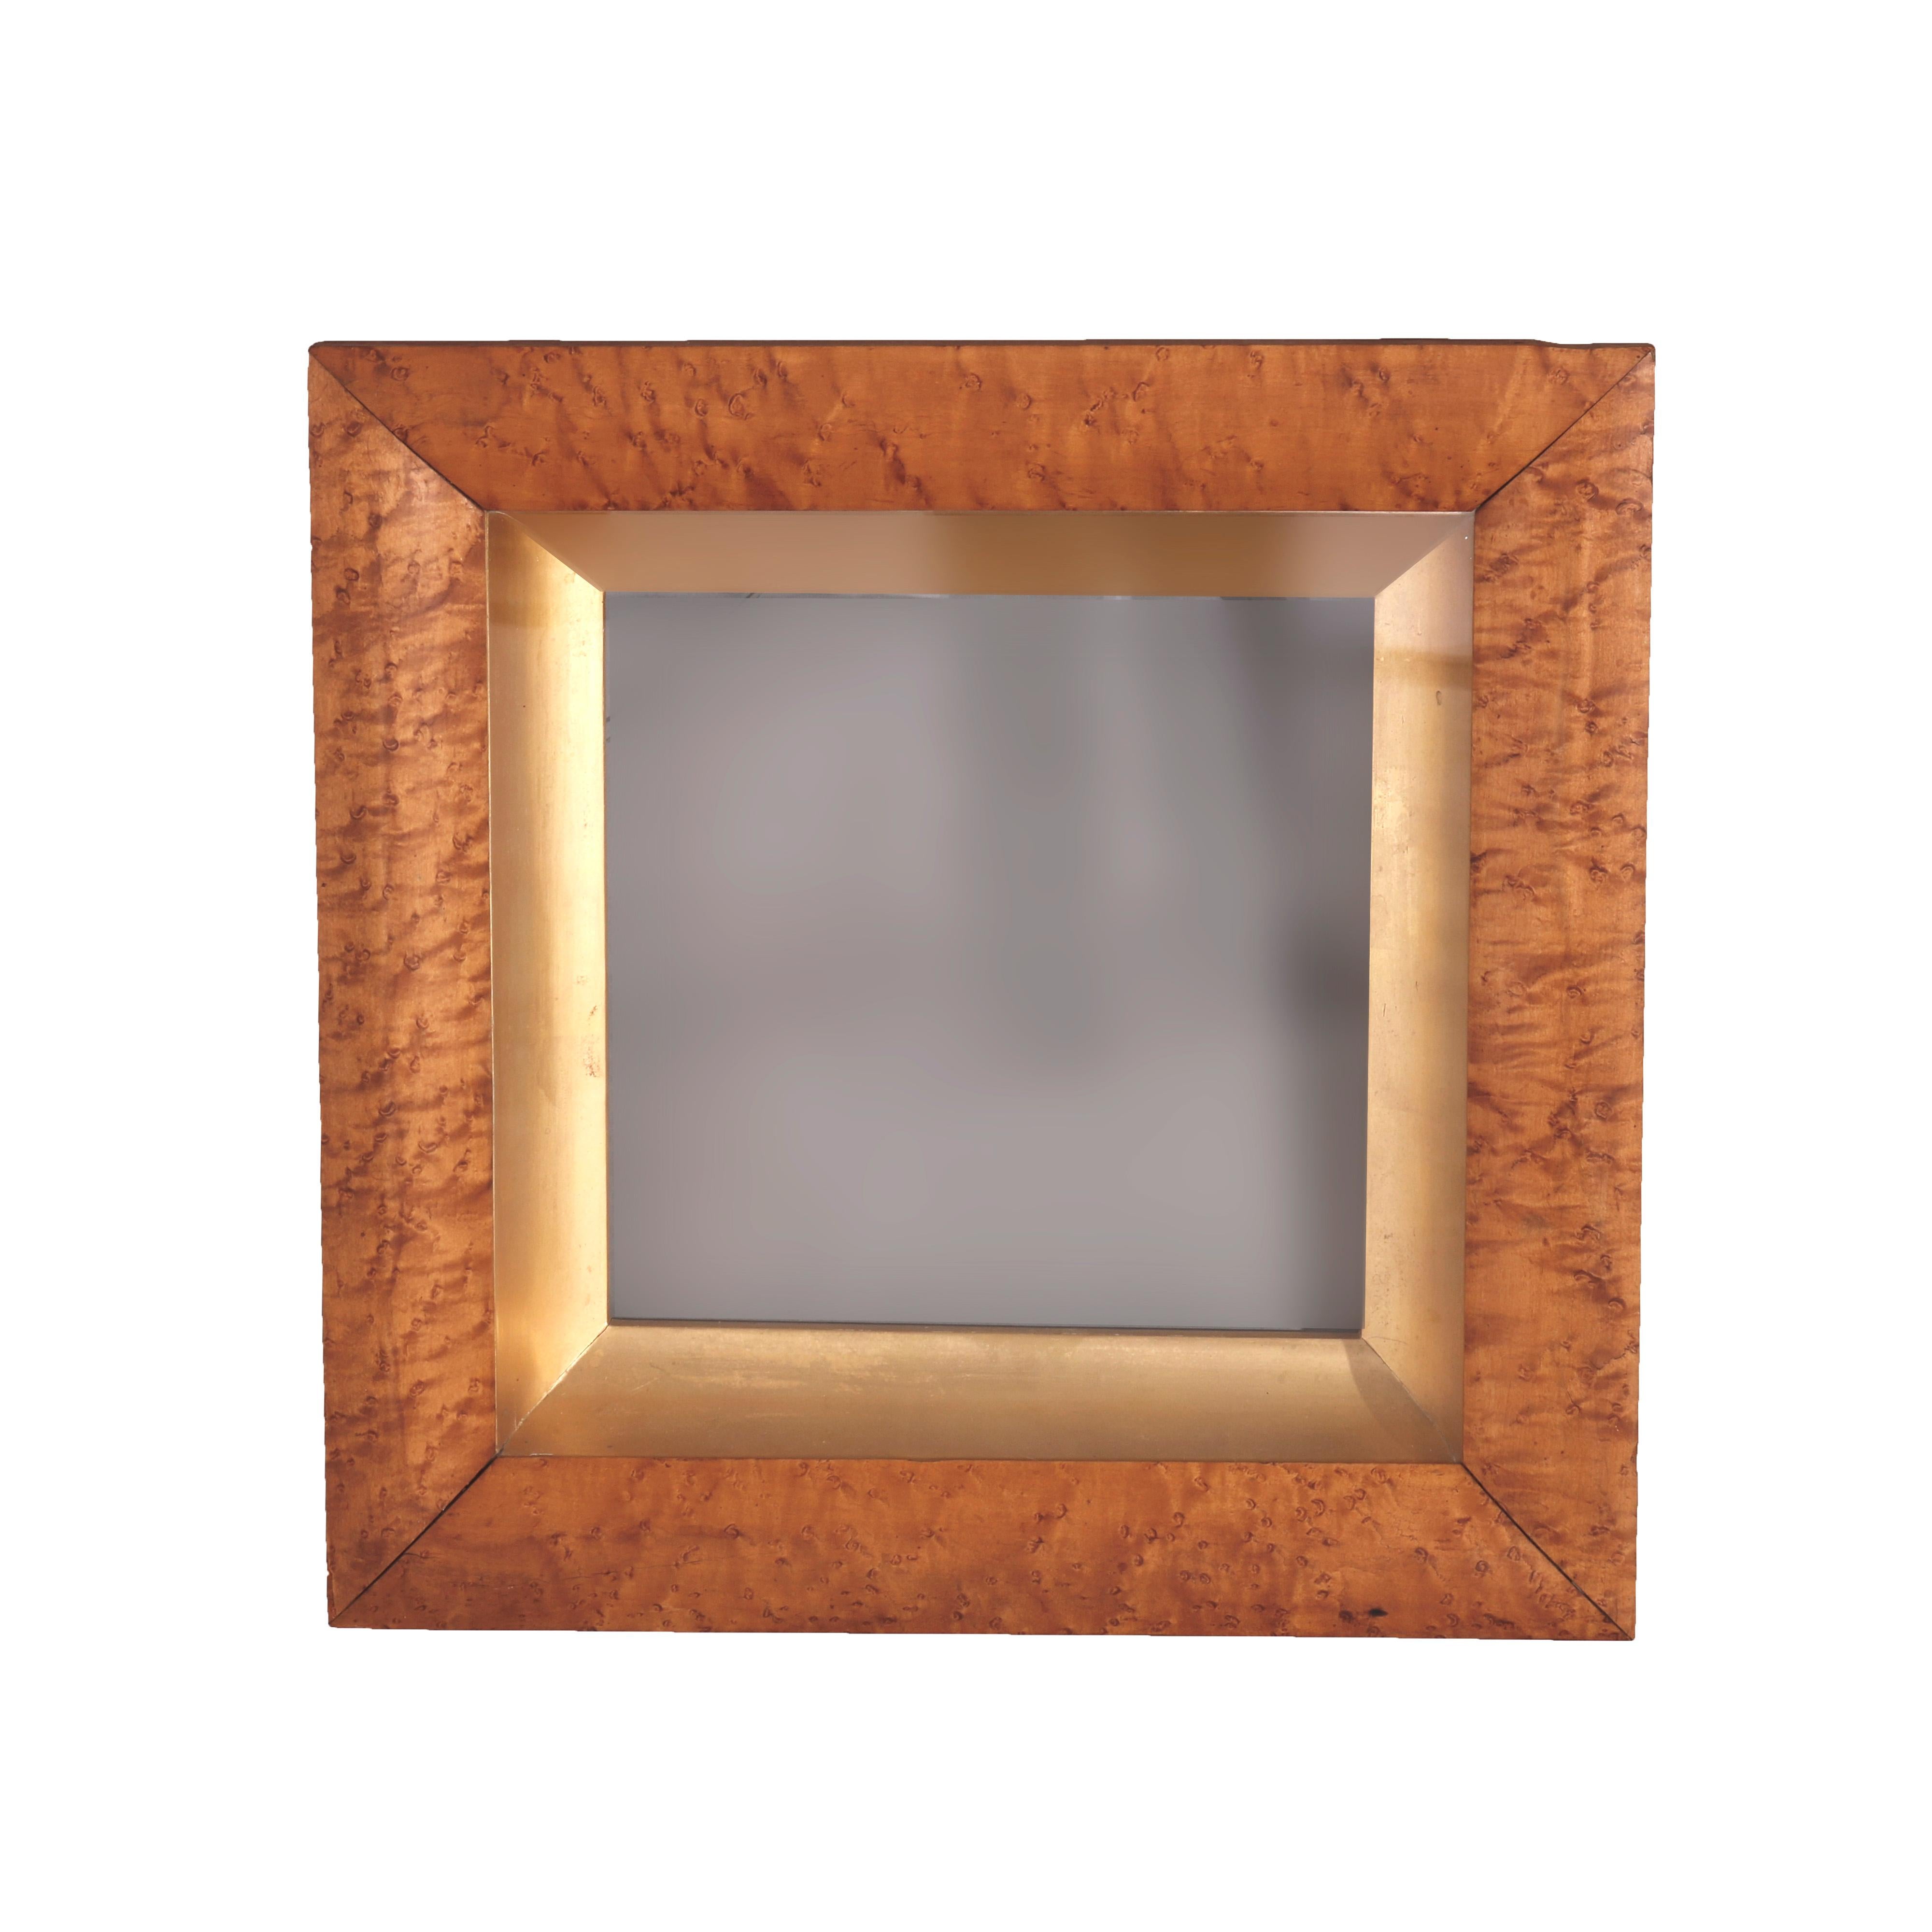 An antique shadow box frame offers birdseye maple and giltwood construction, circa 1850

Measures - 35.25